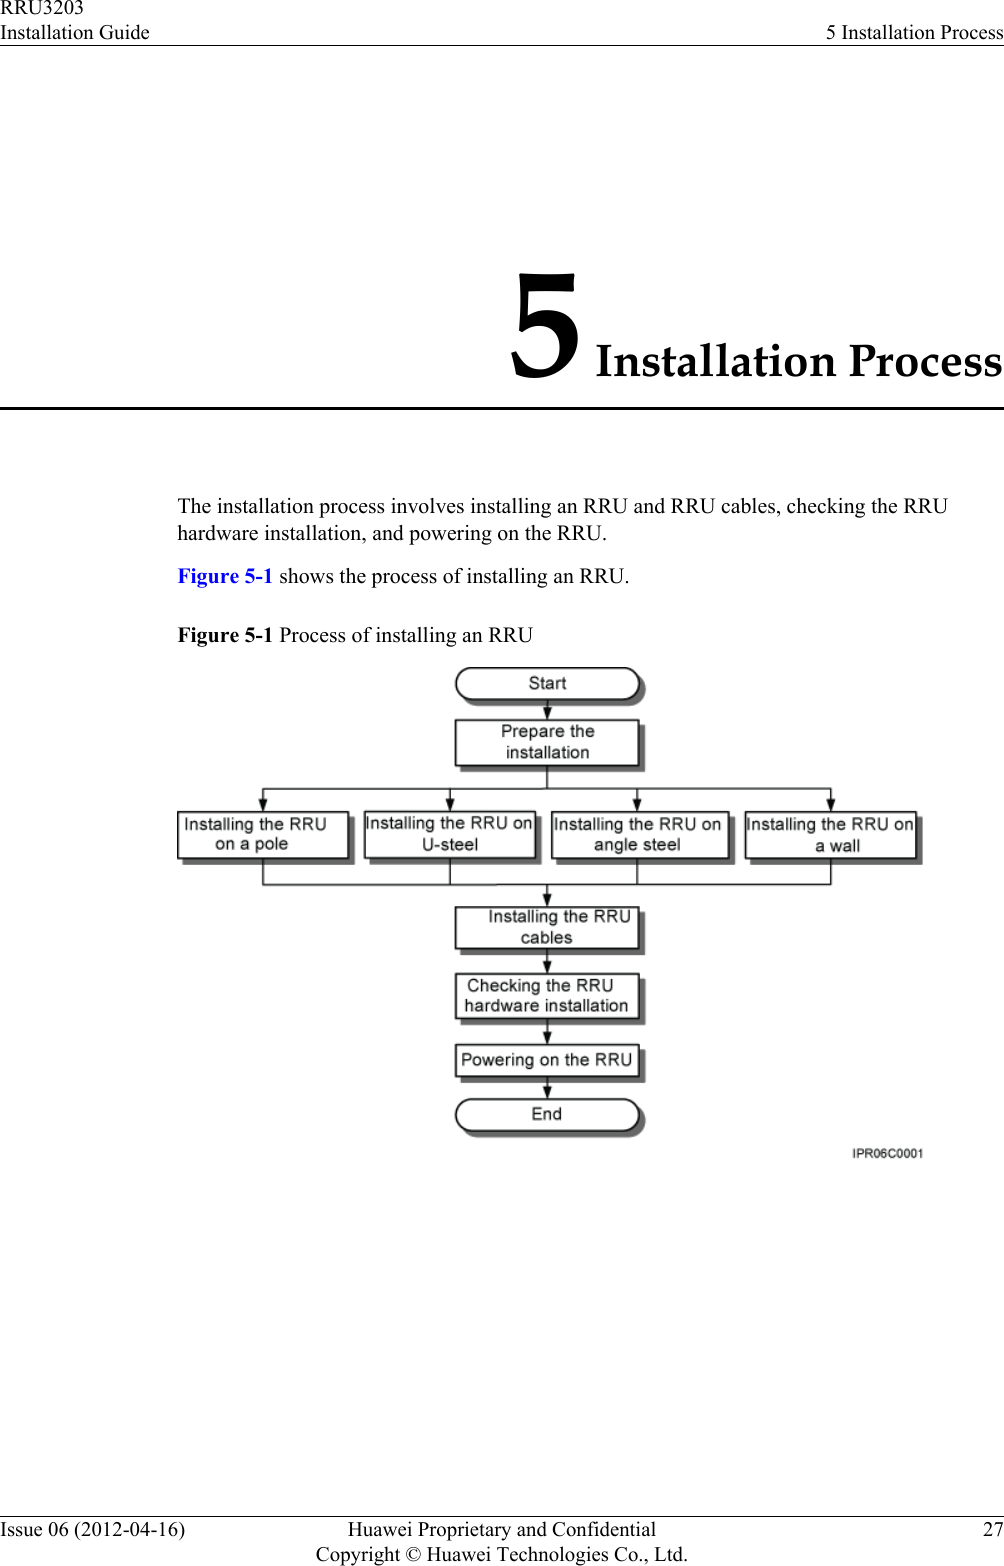 5 Installation ProcessThe installation process involves installing an RRU and RRU cables, checking the RRUhardware installation, and powering on the RRU.Figure 5-1 shows the process of installing an RRU.Figure 5-1 Process of installing an RRU RRU3203Installation Guide 5 Installation ProcessIssue 06 (2012-04-16) Huawei Proprietary and ConfidentialCopyright © Huawei Technologies Co., Ltd.27